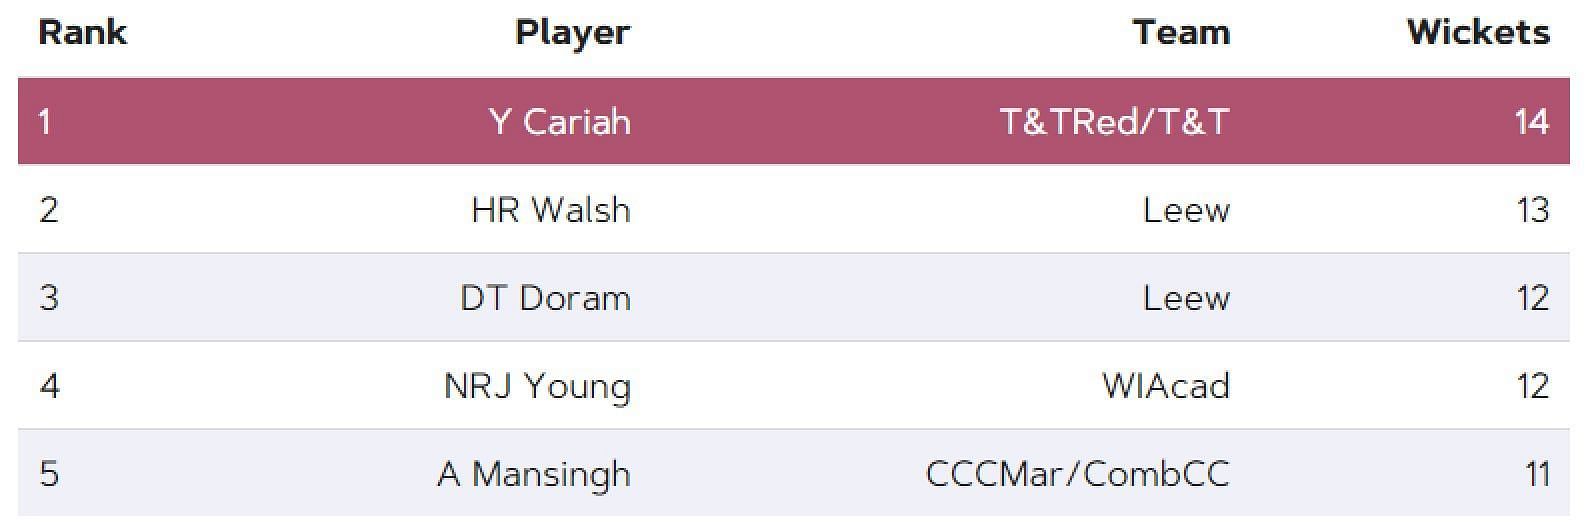 Most wickets list after Match 22 (Image Courtesy: www.windiescricket.com)